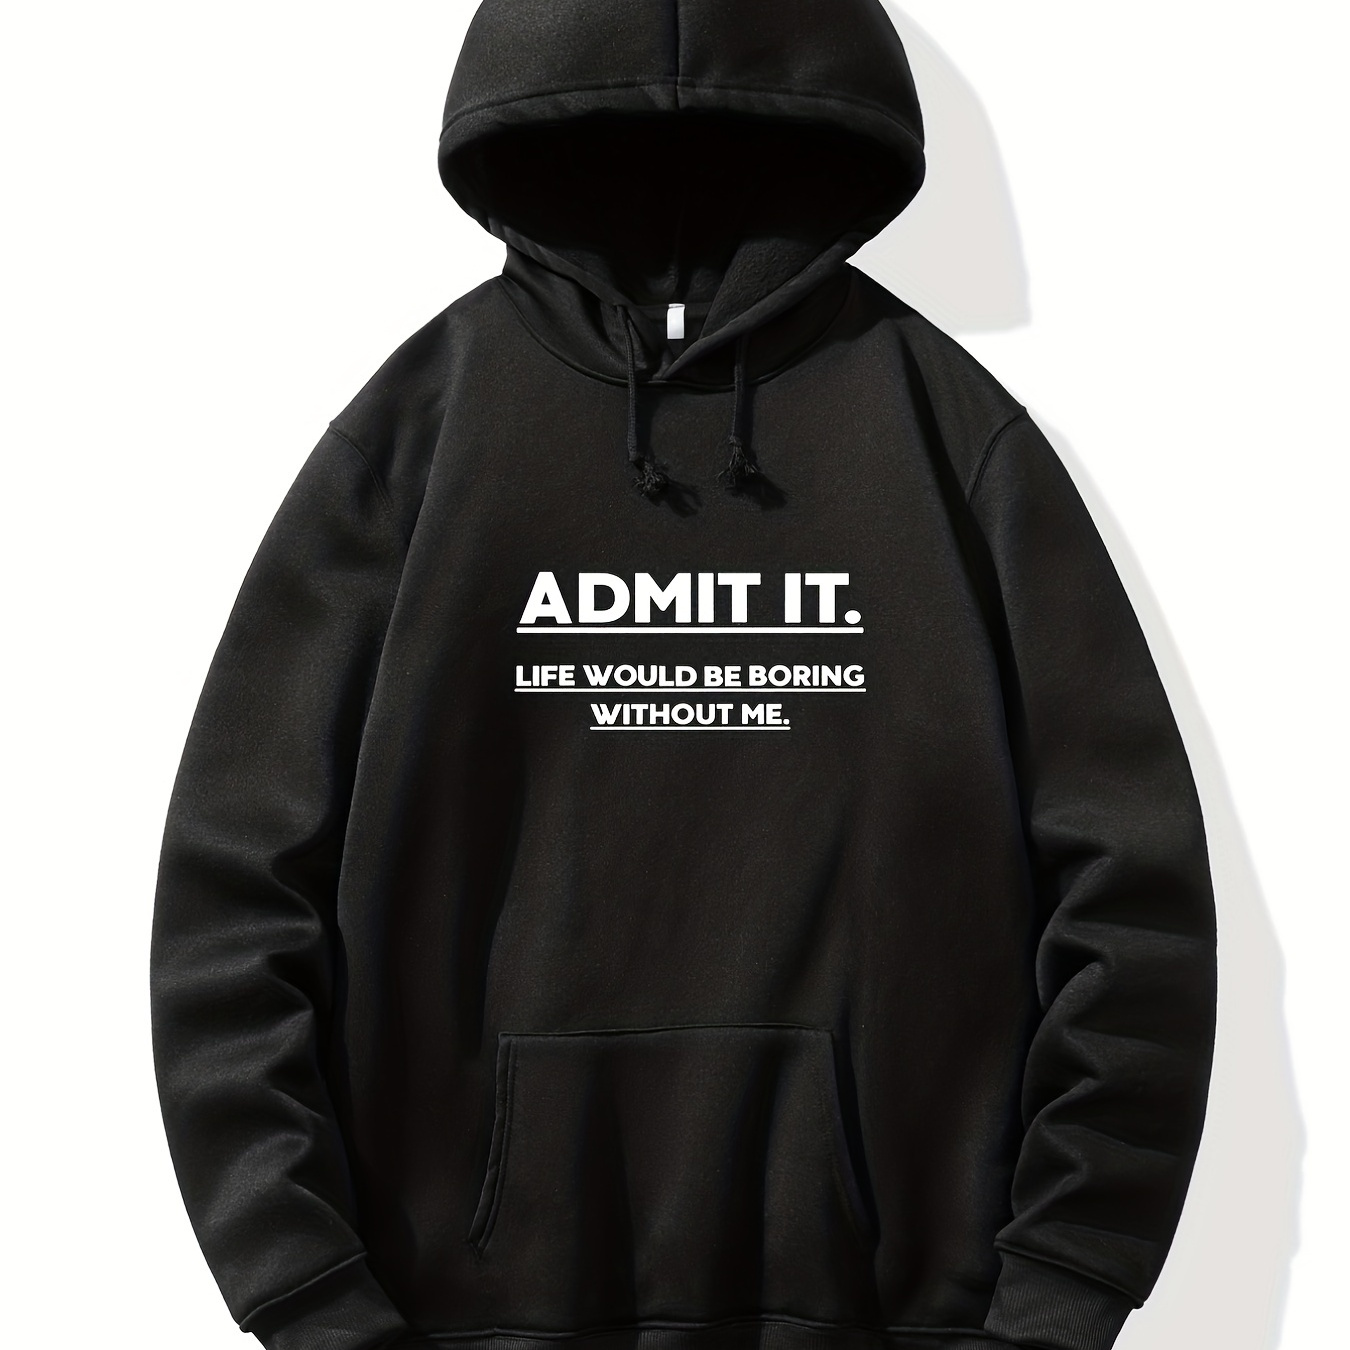 

Cool ’admit It‘ Print Hoodie, Hoodies Top For Men, Men’s Casual Pullover Hooded Graphic Design Sweatshirt With Kangaroo Pocket For Spring Fall, As Gifts